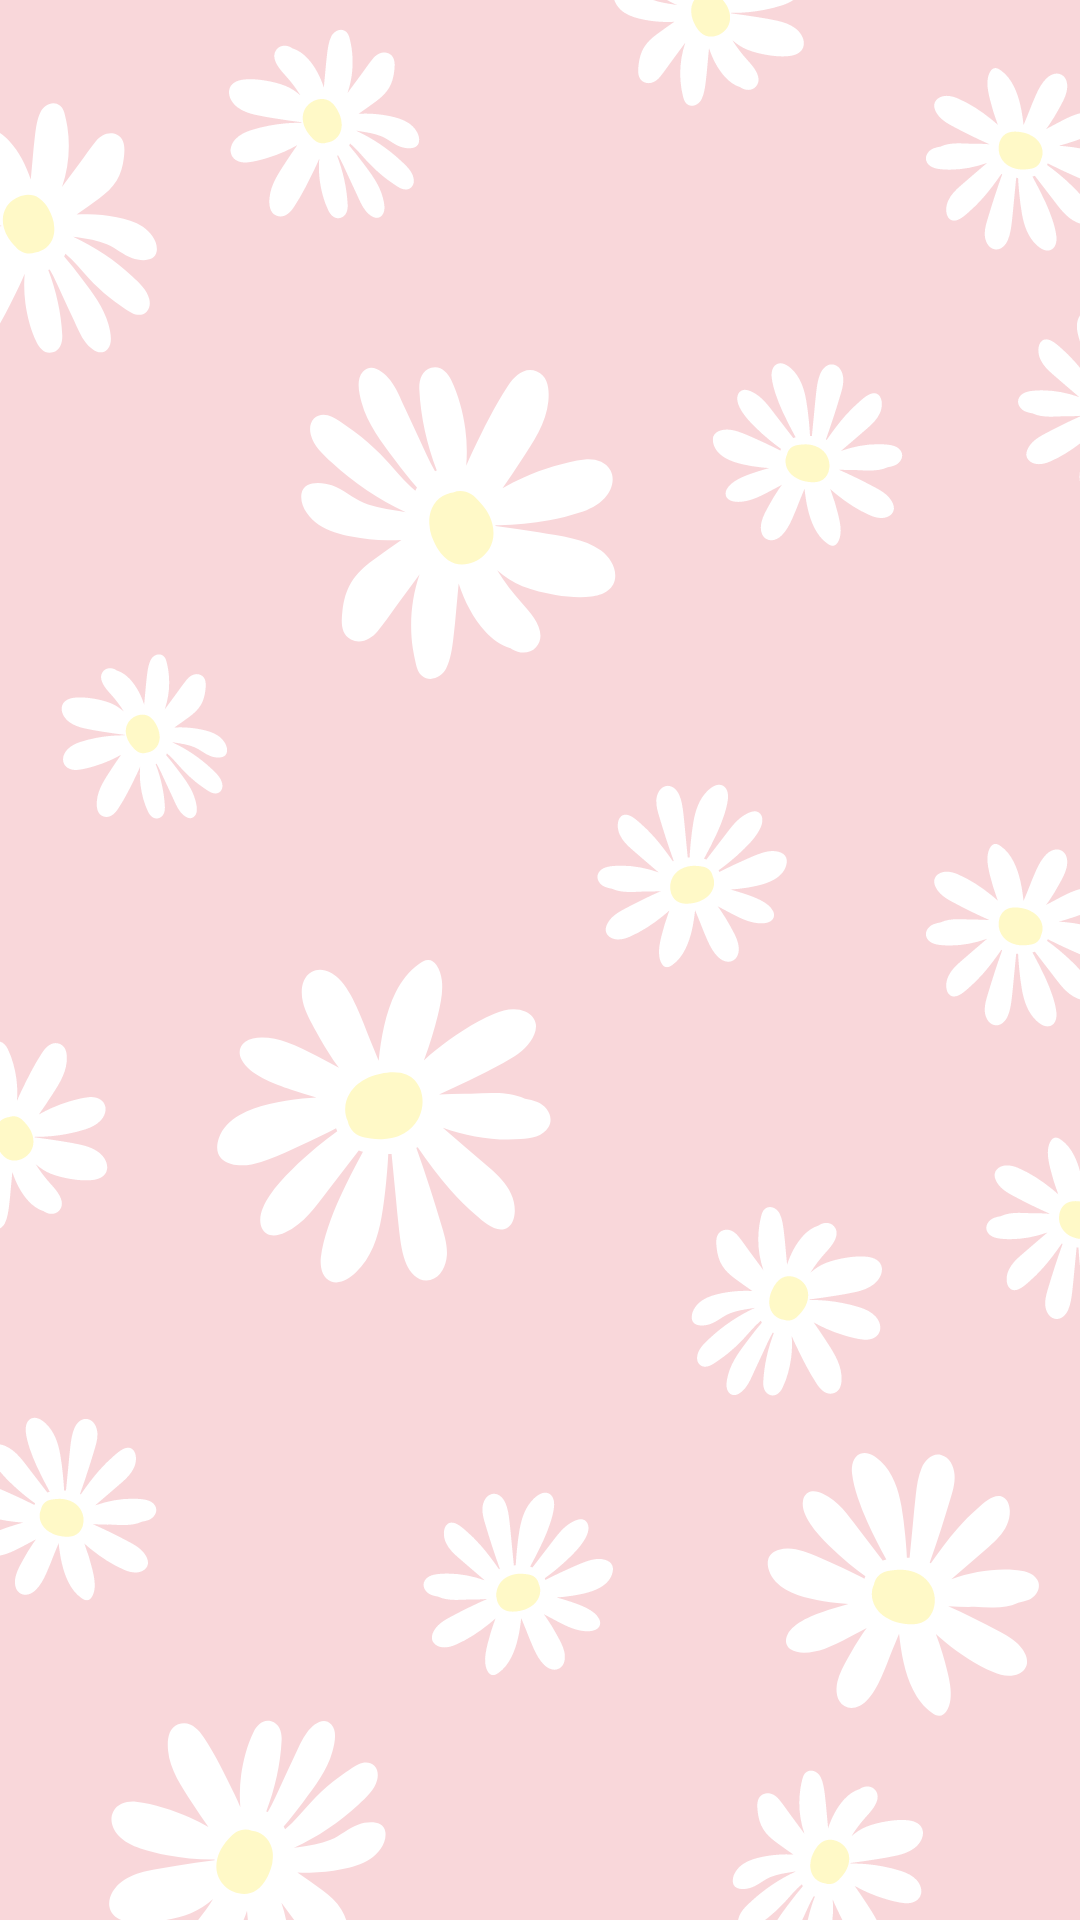 A pink background with white daisies - Pink phone